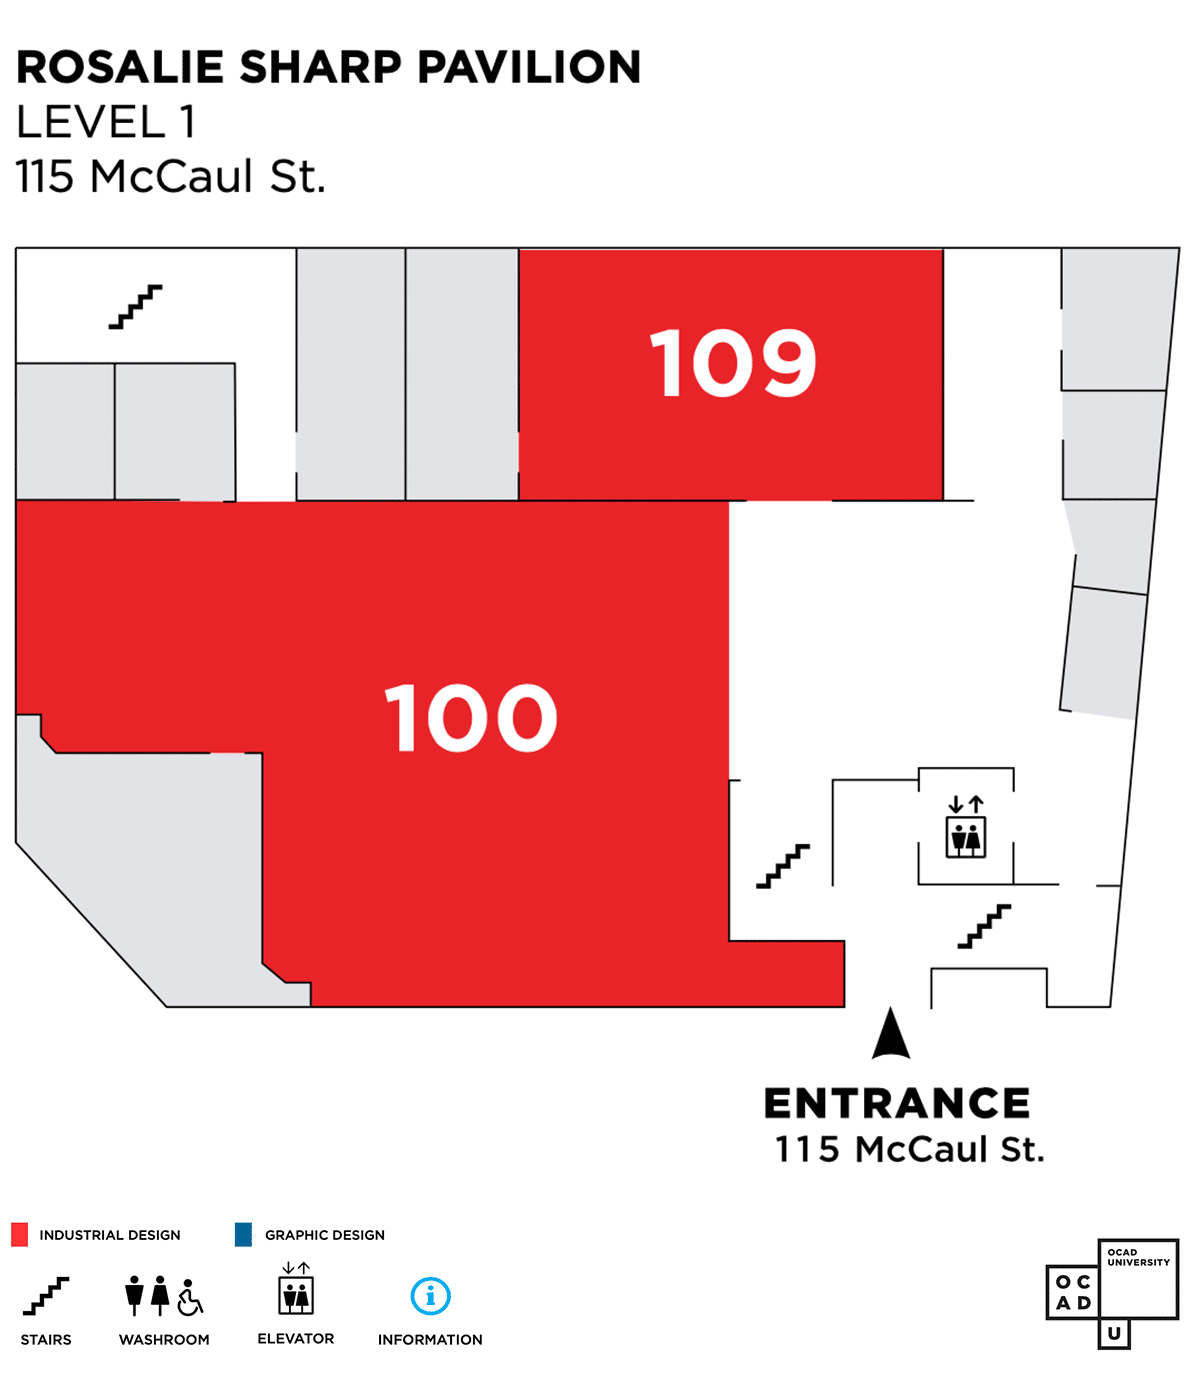 Map of 115 McCaul street level 1. Exhibitions in rooms 100, 109.